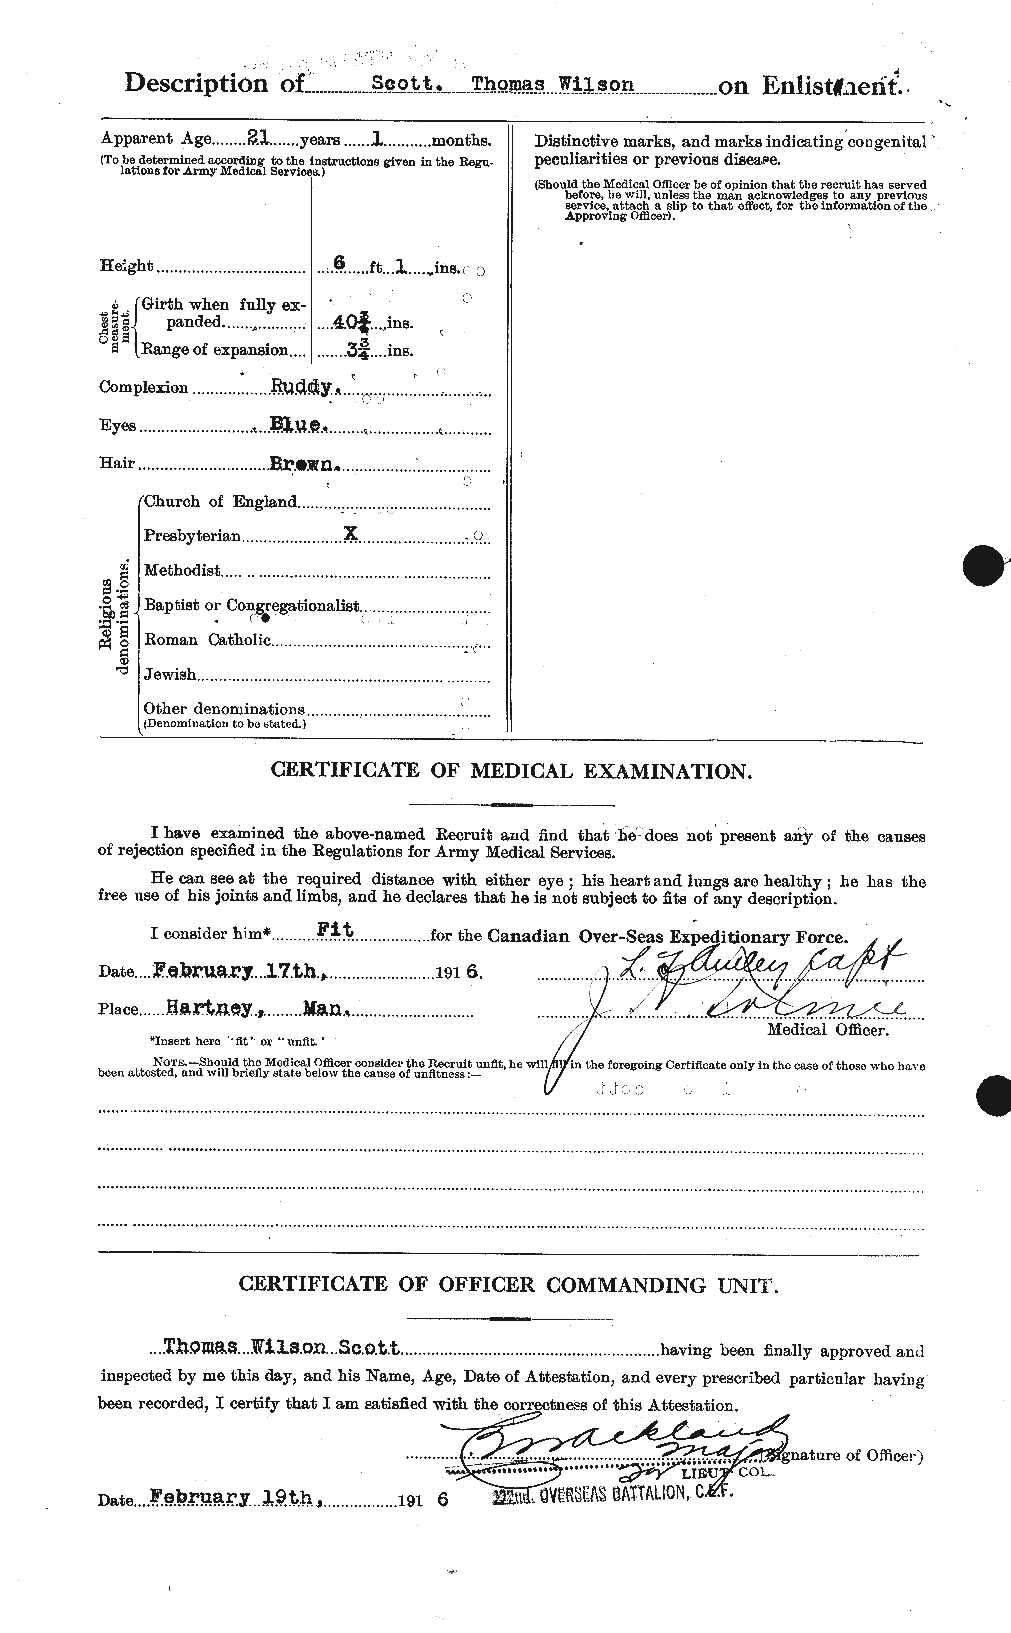 Personnel Records of the First World War - CEF 088213b